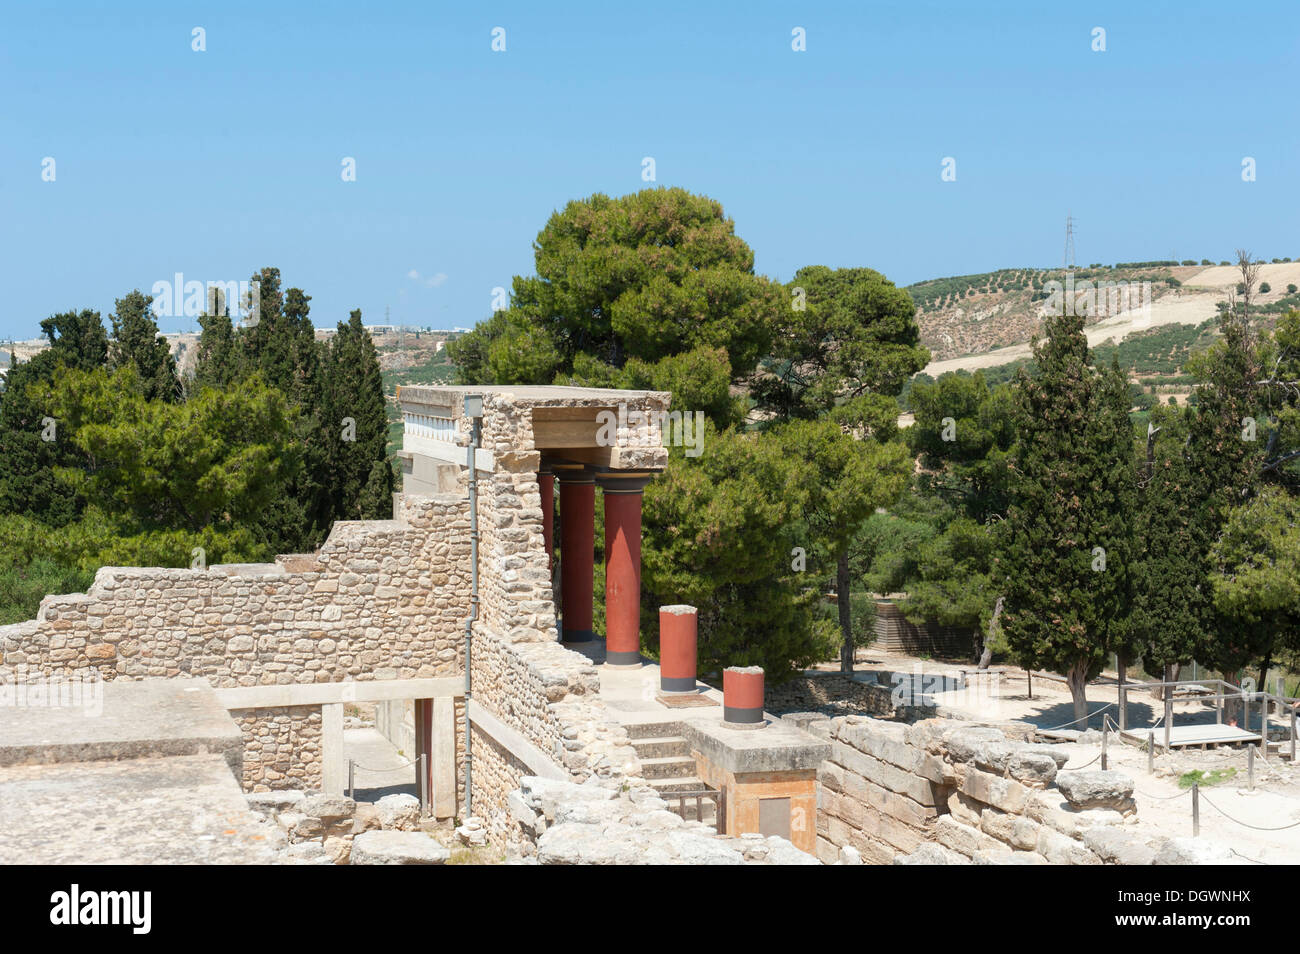 Archaeological site, Minoan culture, reconstruction, Palace of Knossos, Crete, Greece, Europe Stock Photo